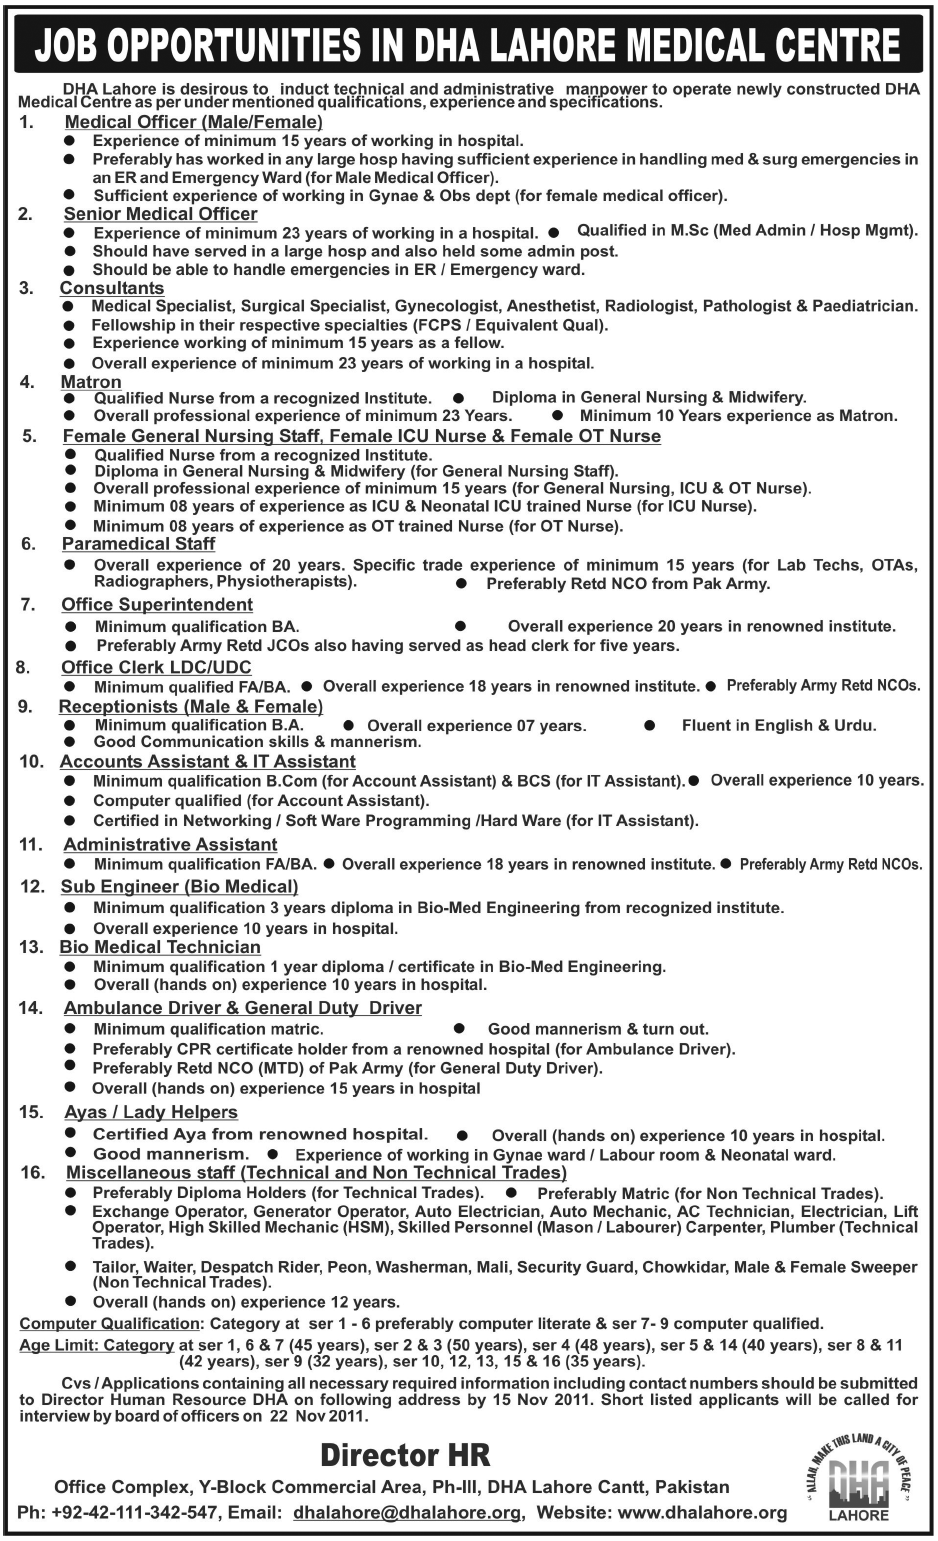 DHA Lahore Medical Centre Job Opportunities